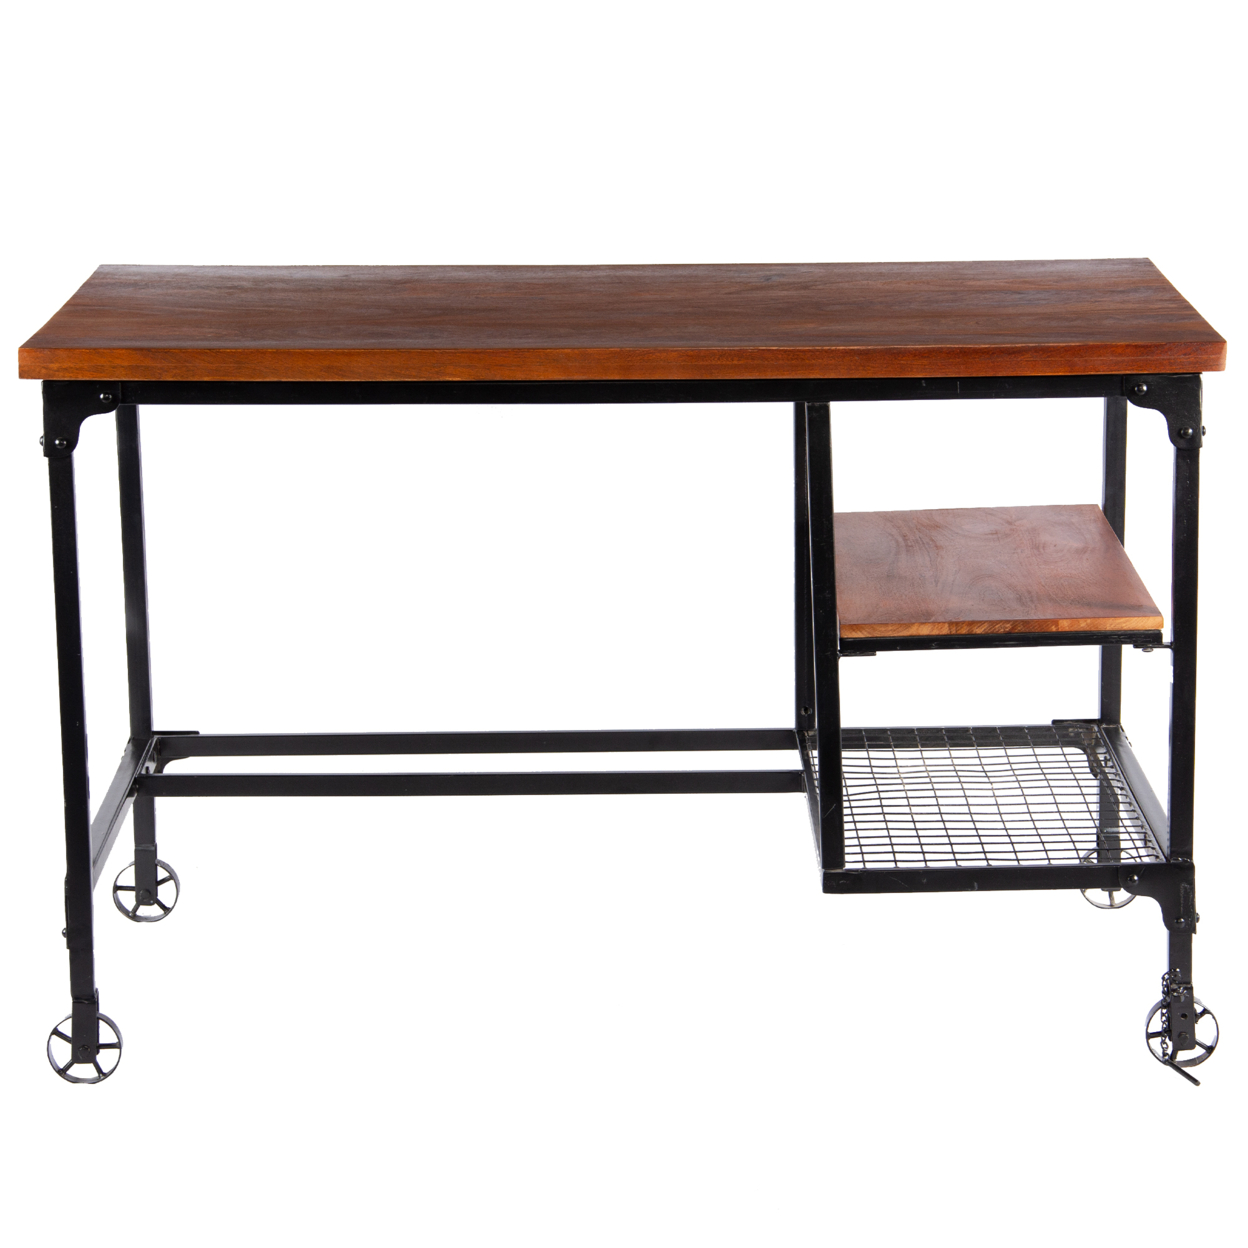 Industrial Style Wood And Metal Desk With Two Bottom Shelves, Brown And Black- Saltoro Sherpi